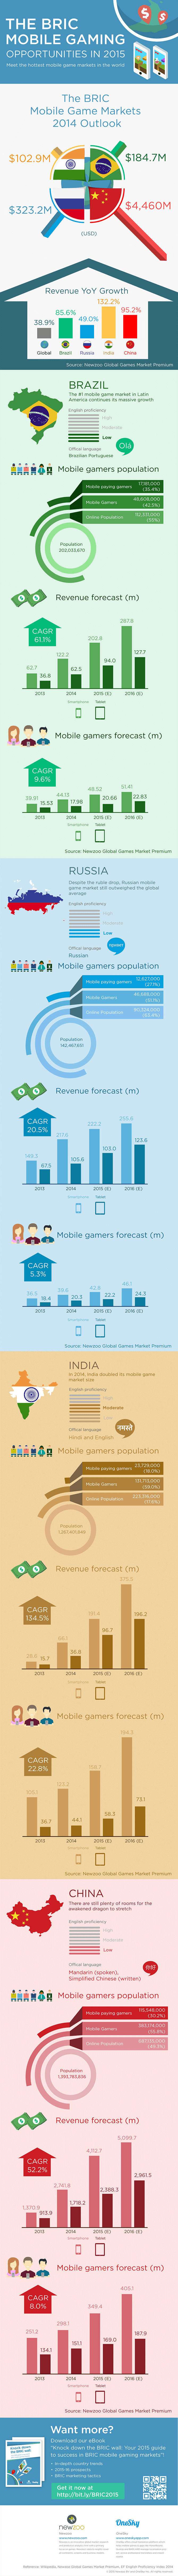 BRIC-mobile-gaming-2015-infographic-670w